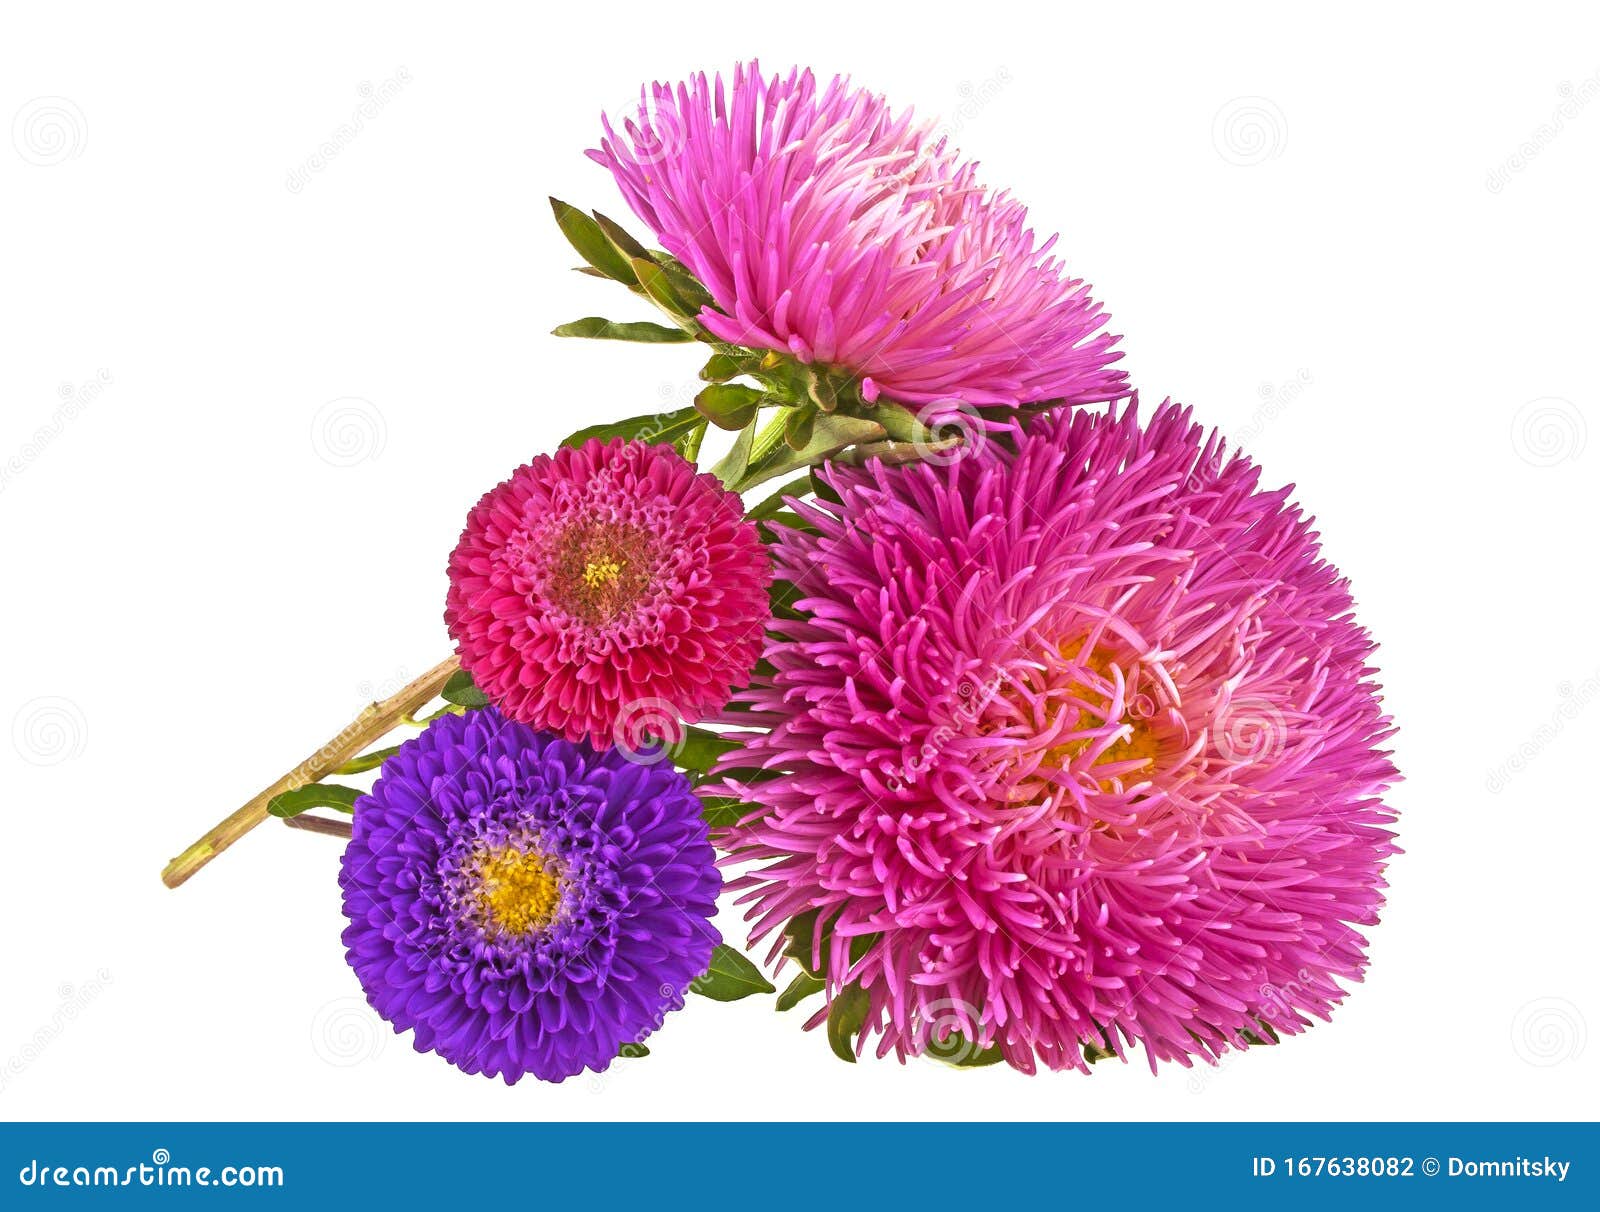 Aster Flowers Isolated On A White Background Asters Composition Stock Photo Image Of Bloom Botany 167638082